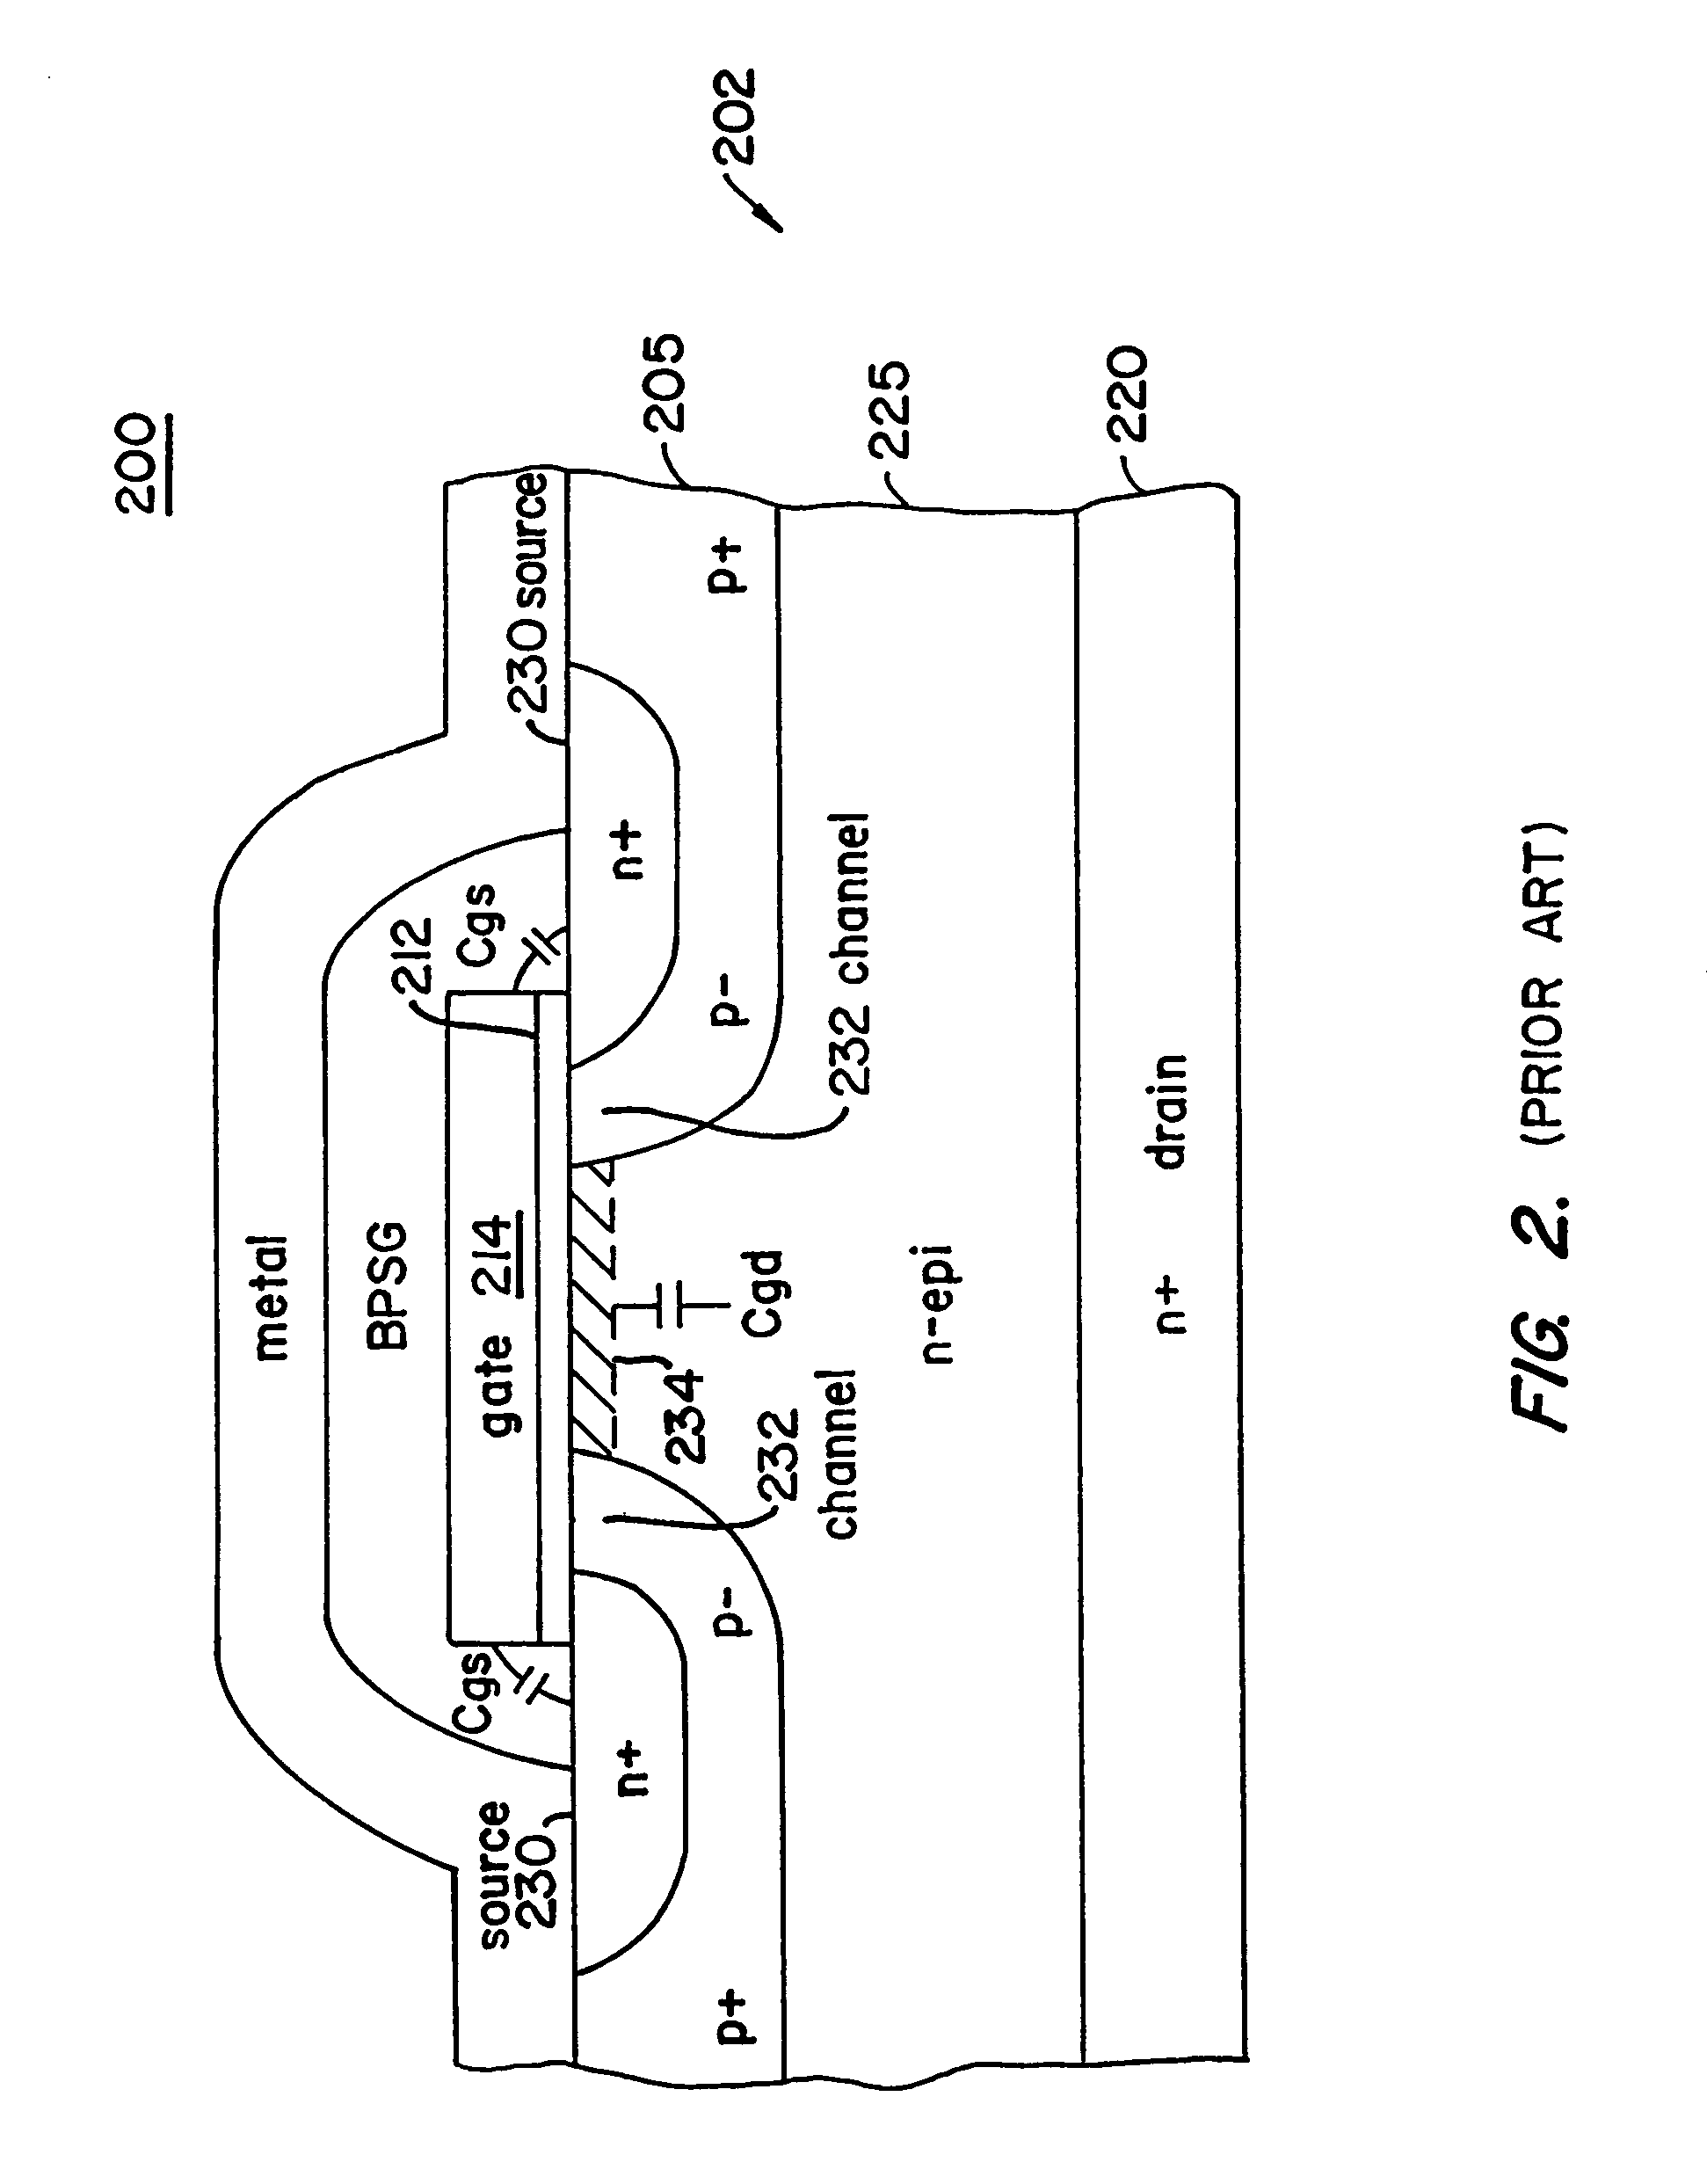 Power MOS device with improved gate charge performance